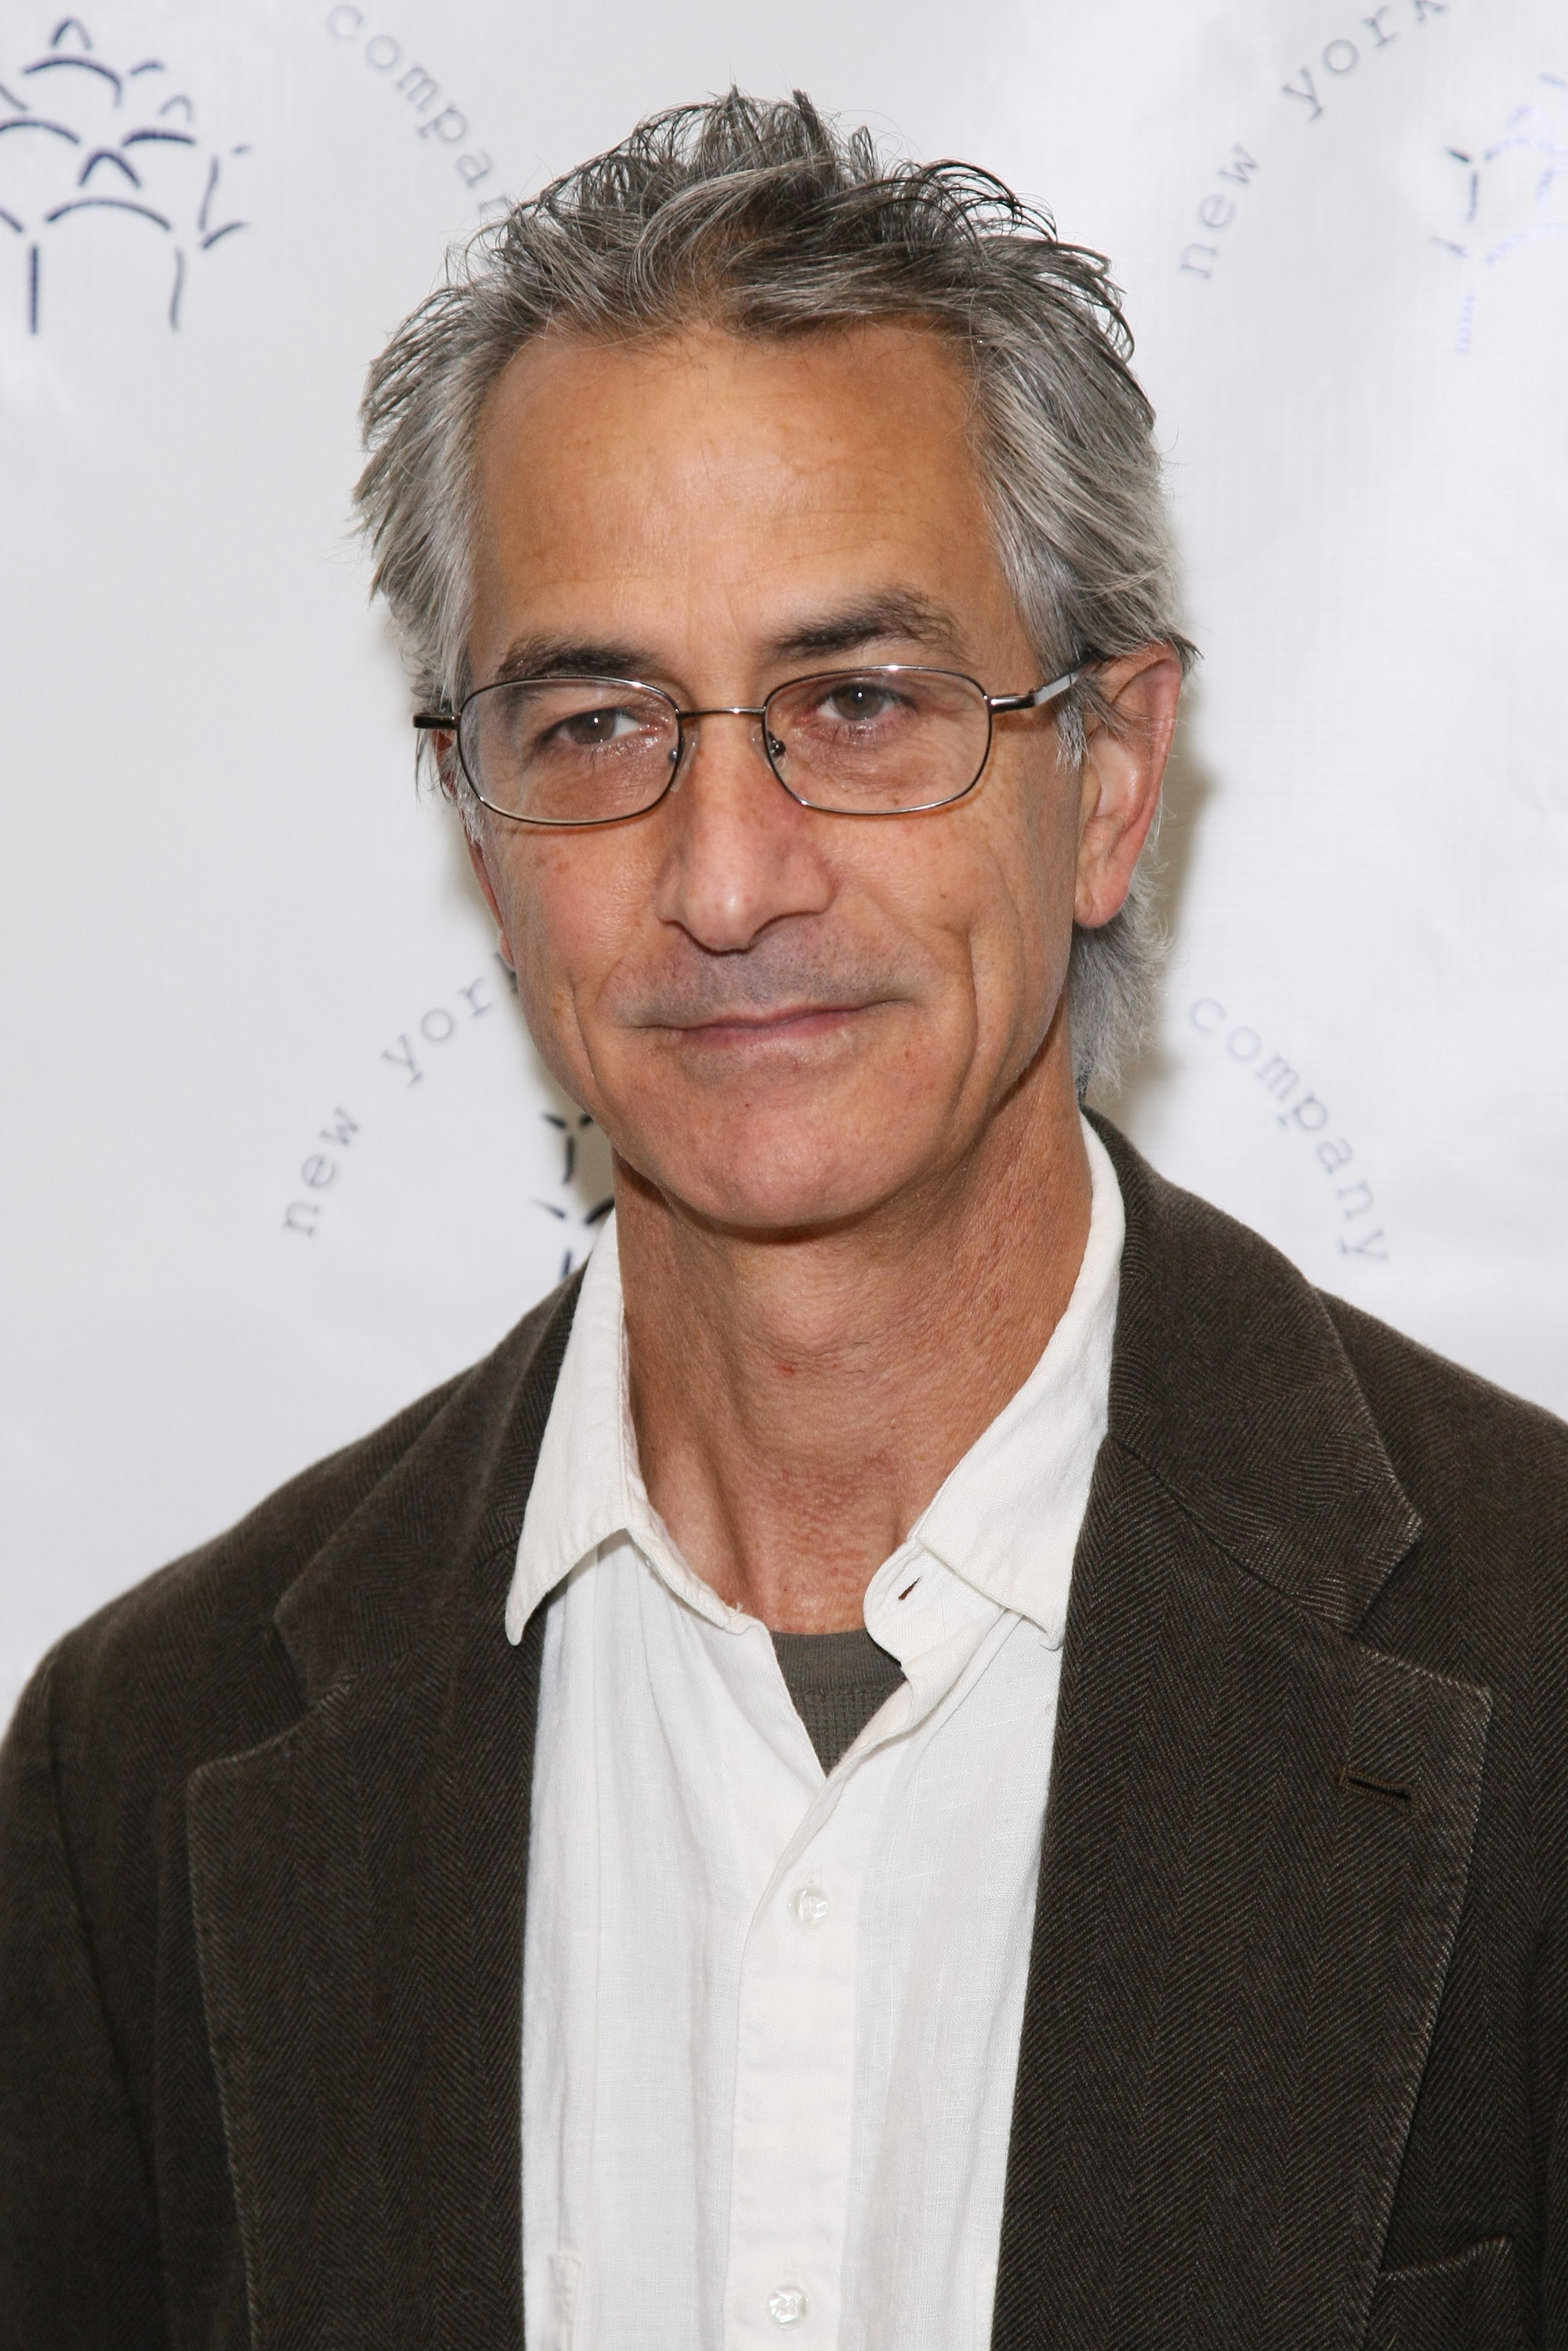 How tall is David Strathairn?